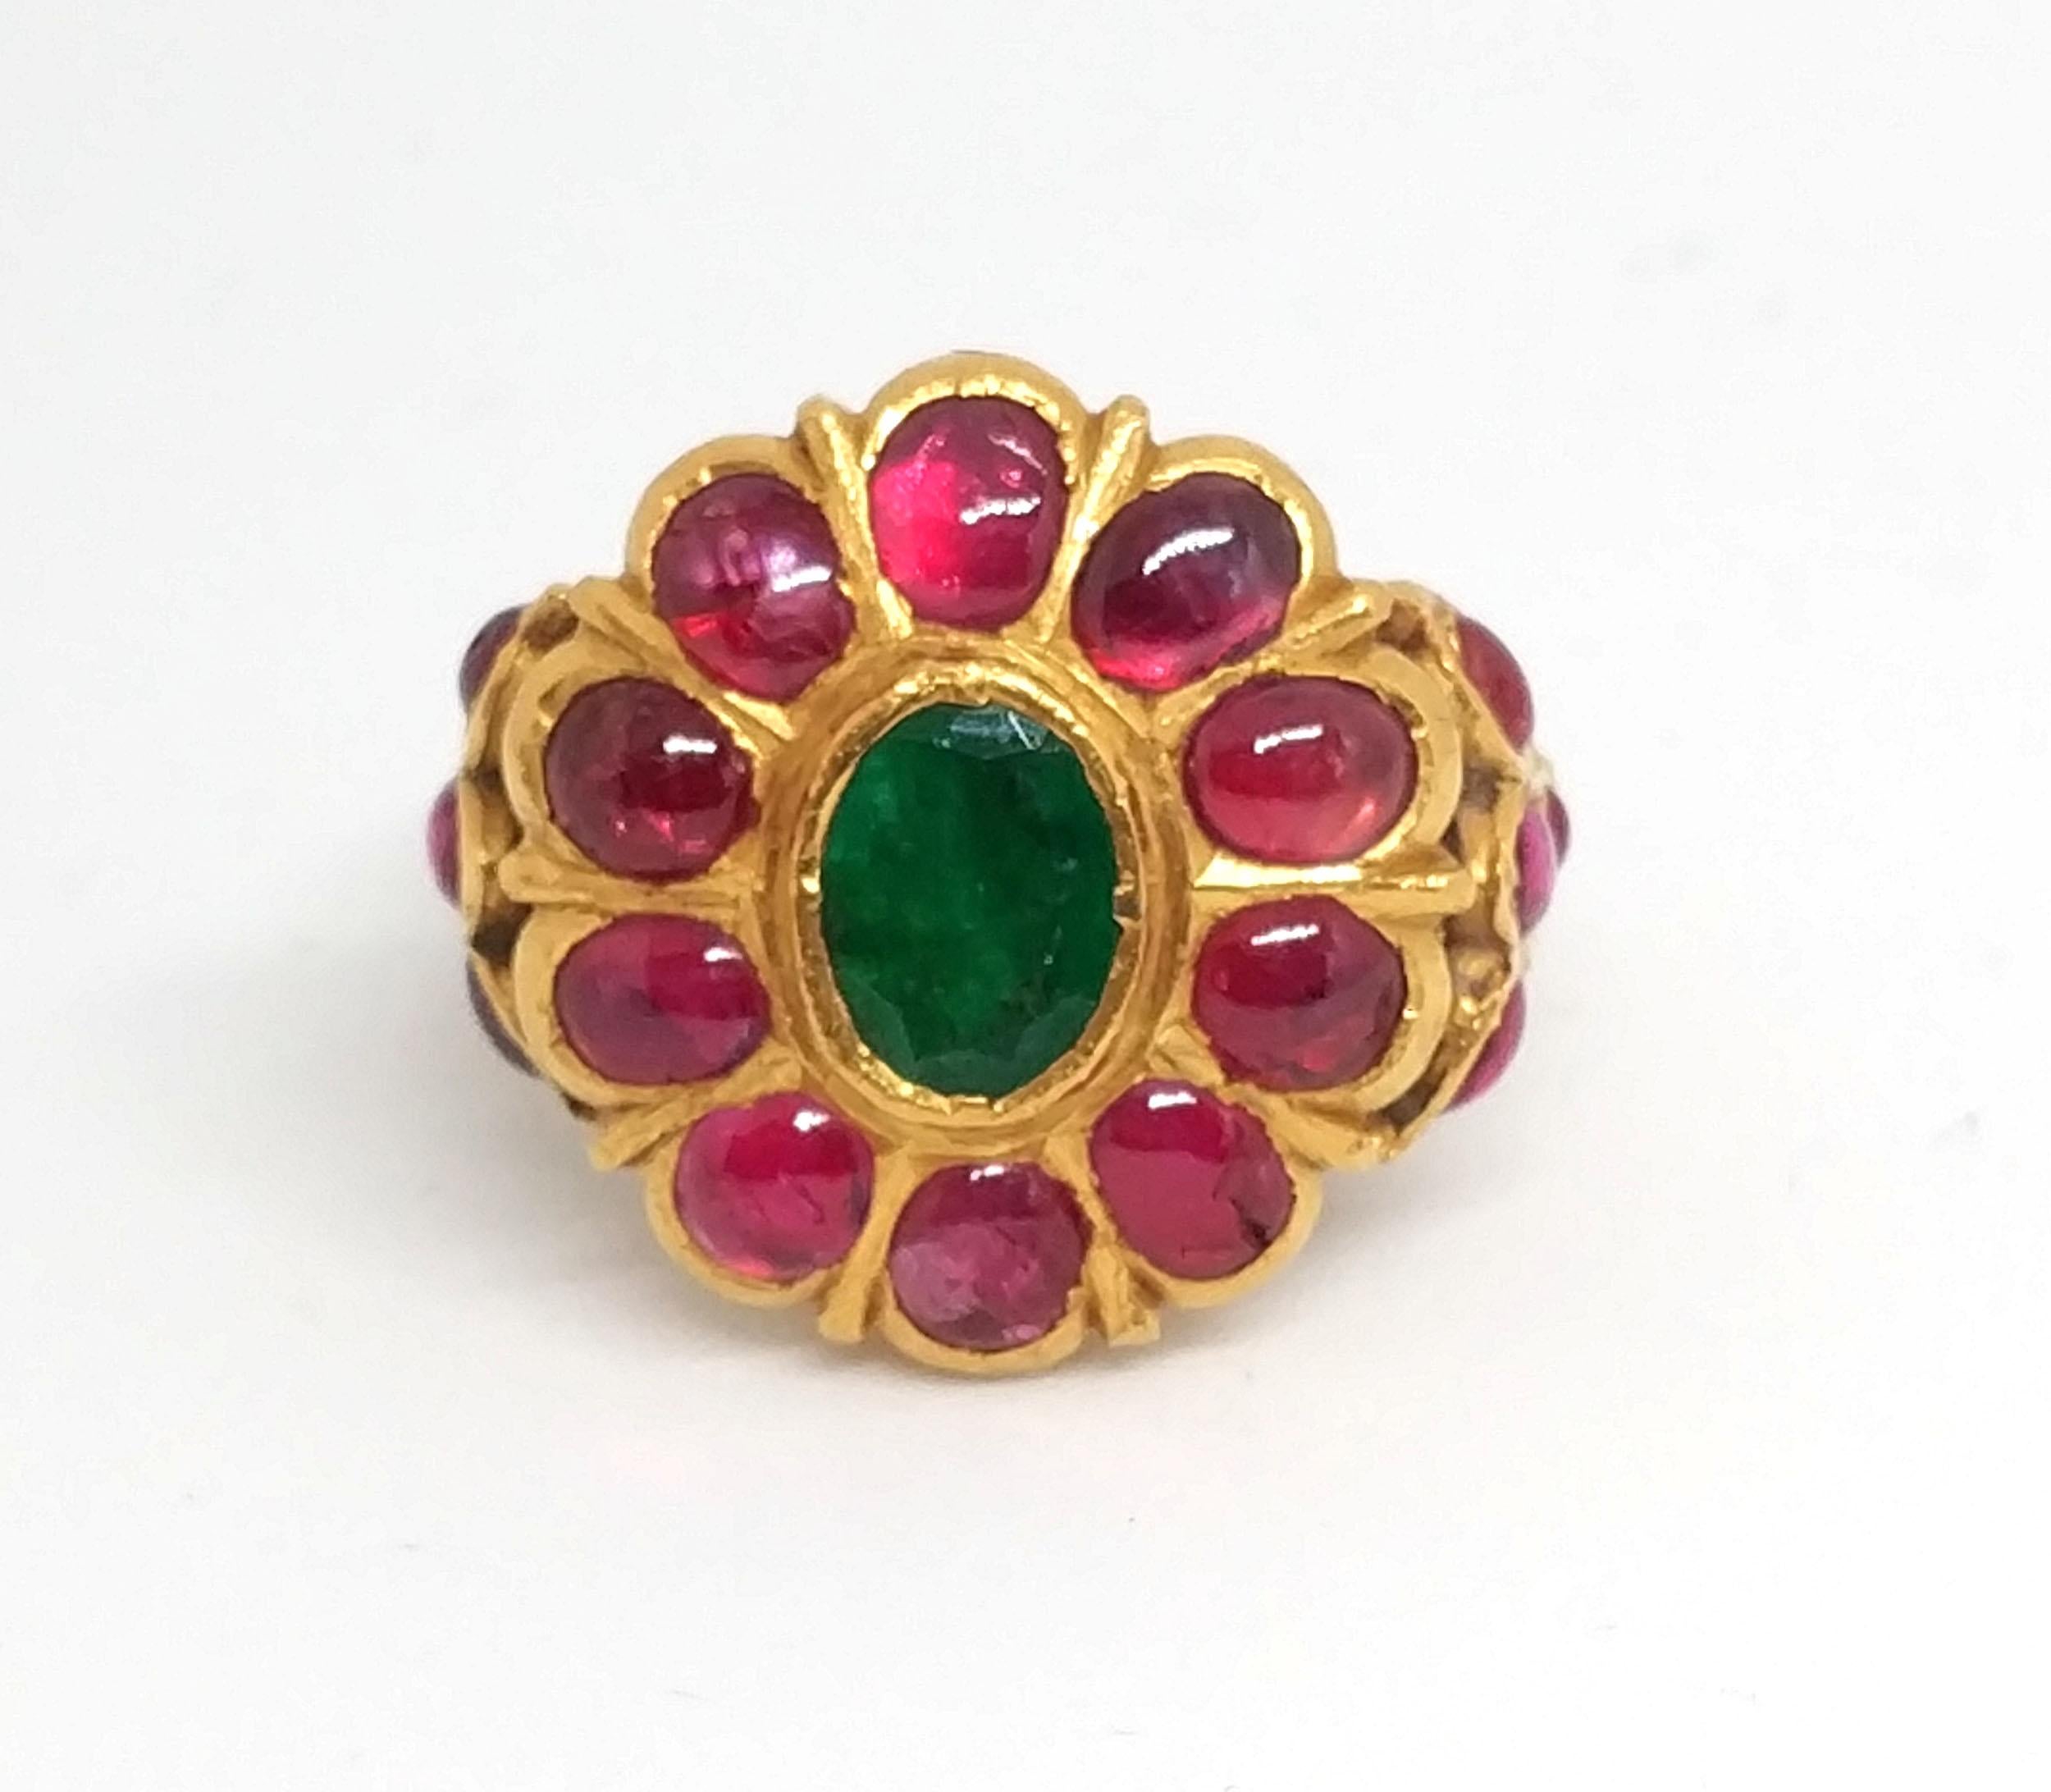 Antique Royal 5.5 carat Ruby and 3 carat Emerald Ring in 23 Carat Gold For Sale 6